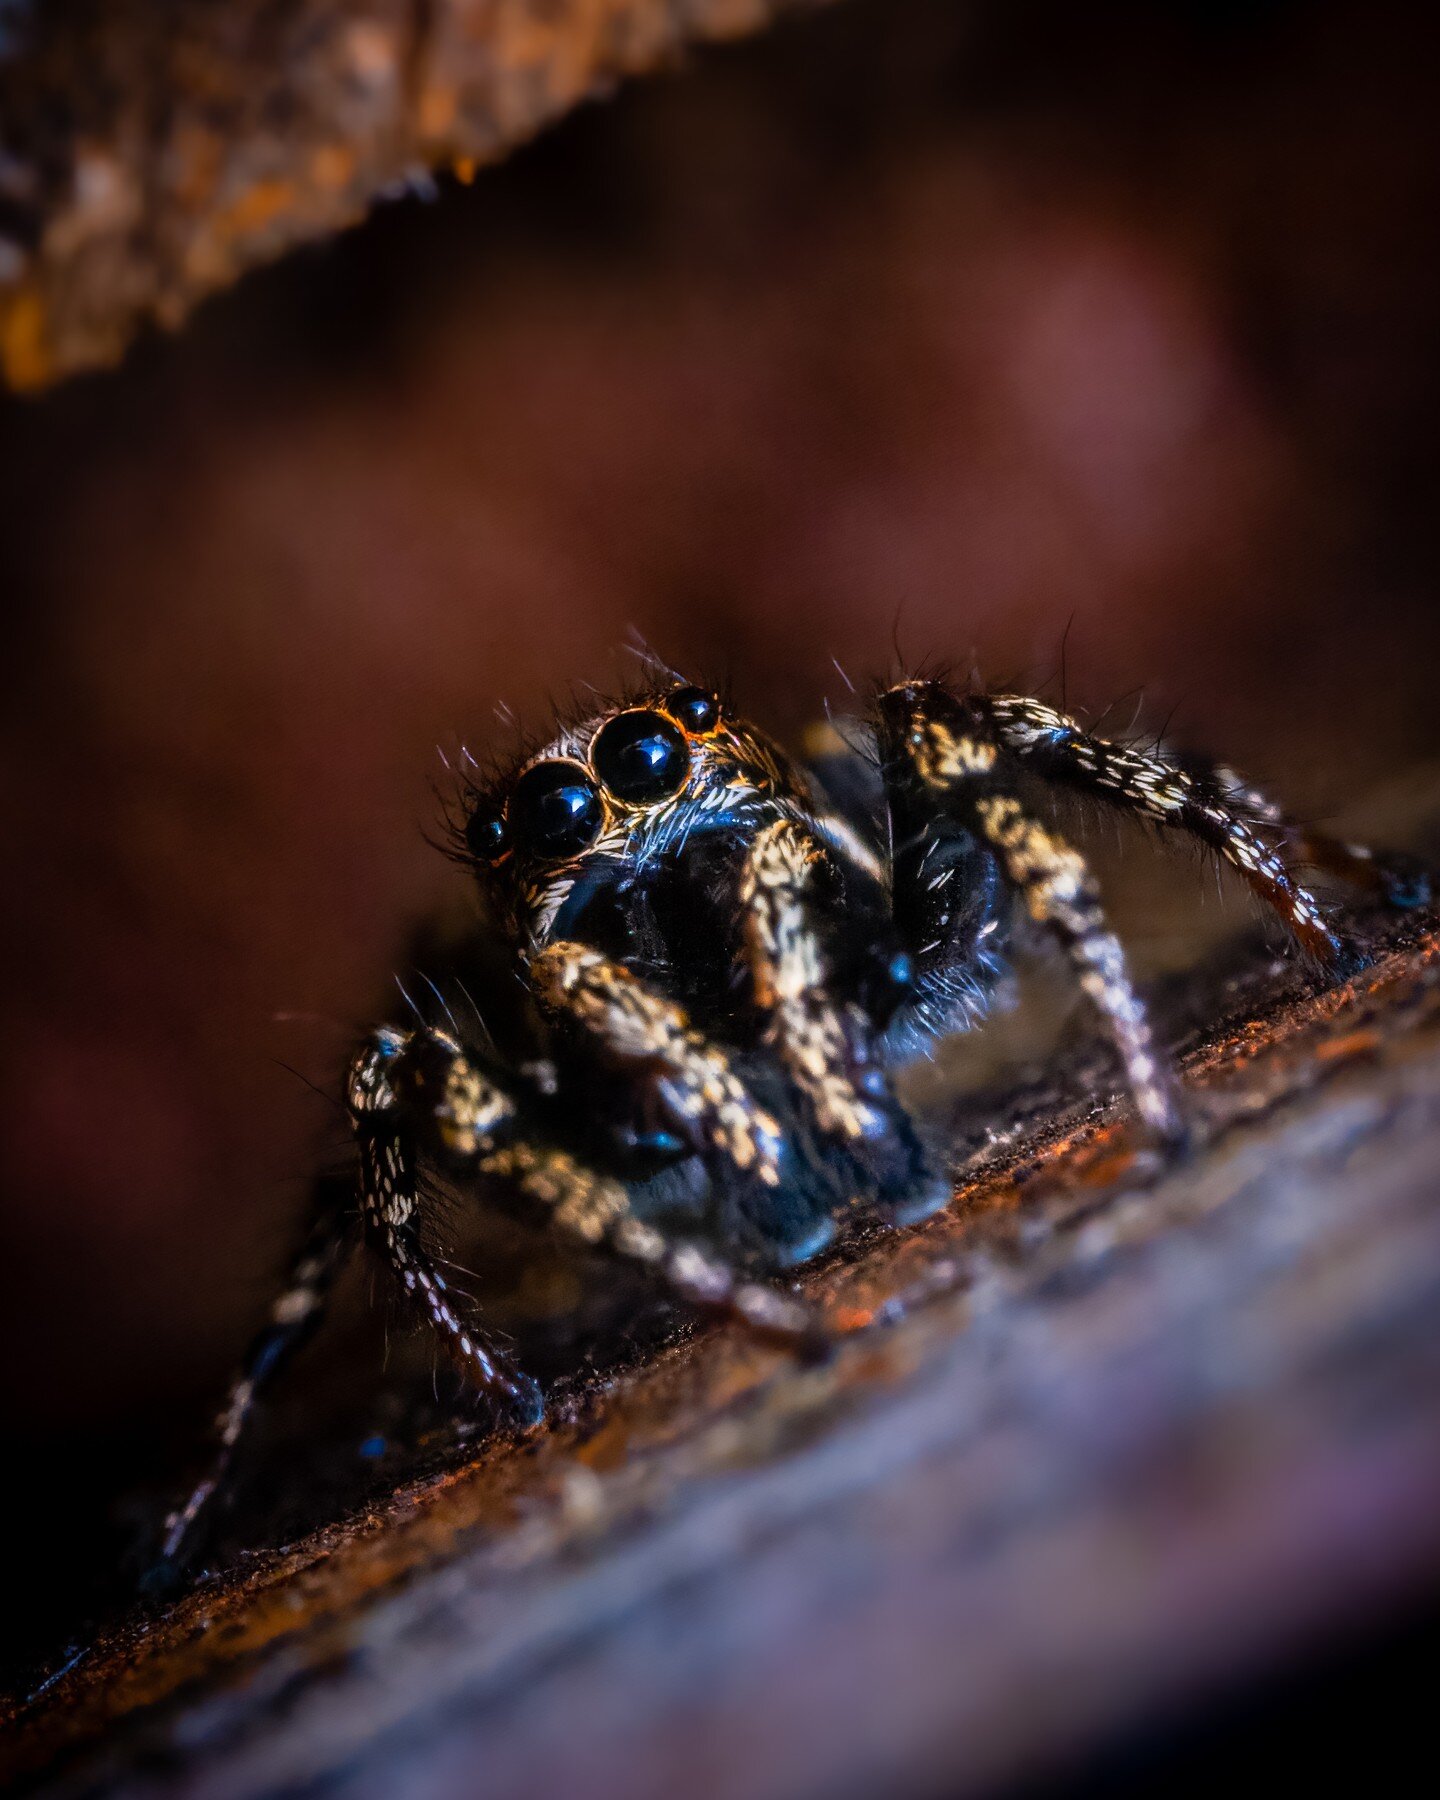 Shed Zebra!

Tiny Zebra Spider hiding from me in the crack between the shed door and its frame. It wasn't going to stay long...hope I see it again someday!

#macro #macrophoto #macrophotos #photomacro #macroholic #macro_highlight #Macro_brilliance #p